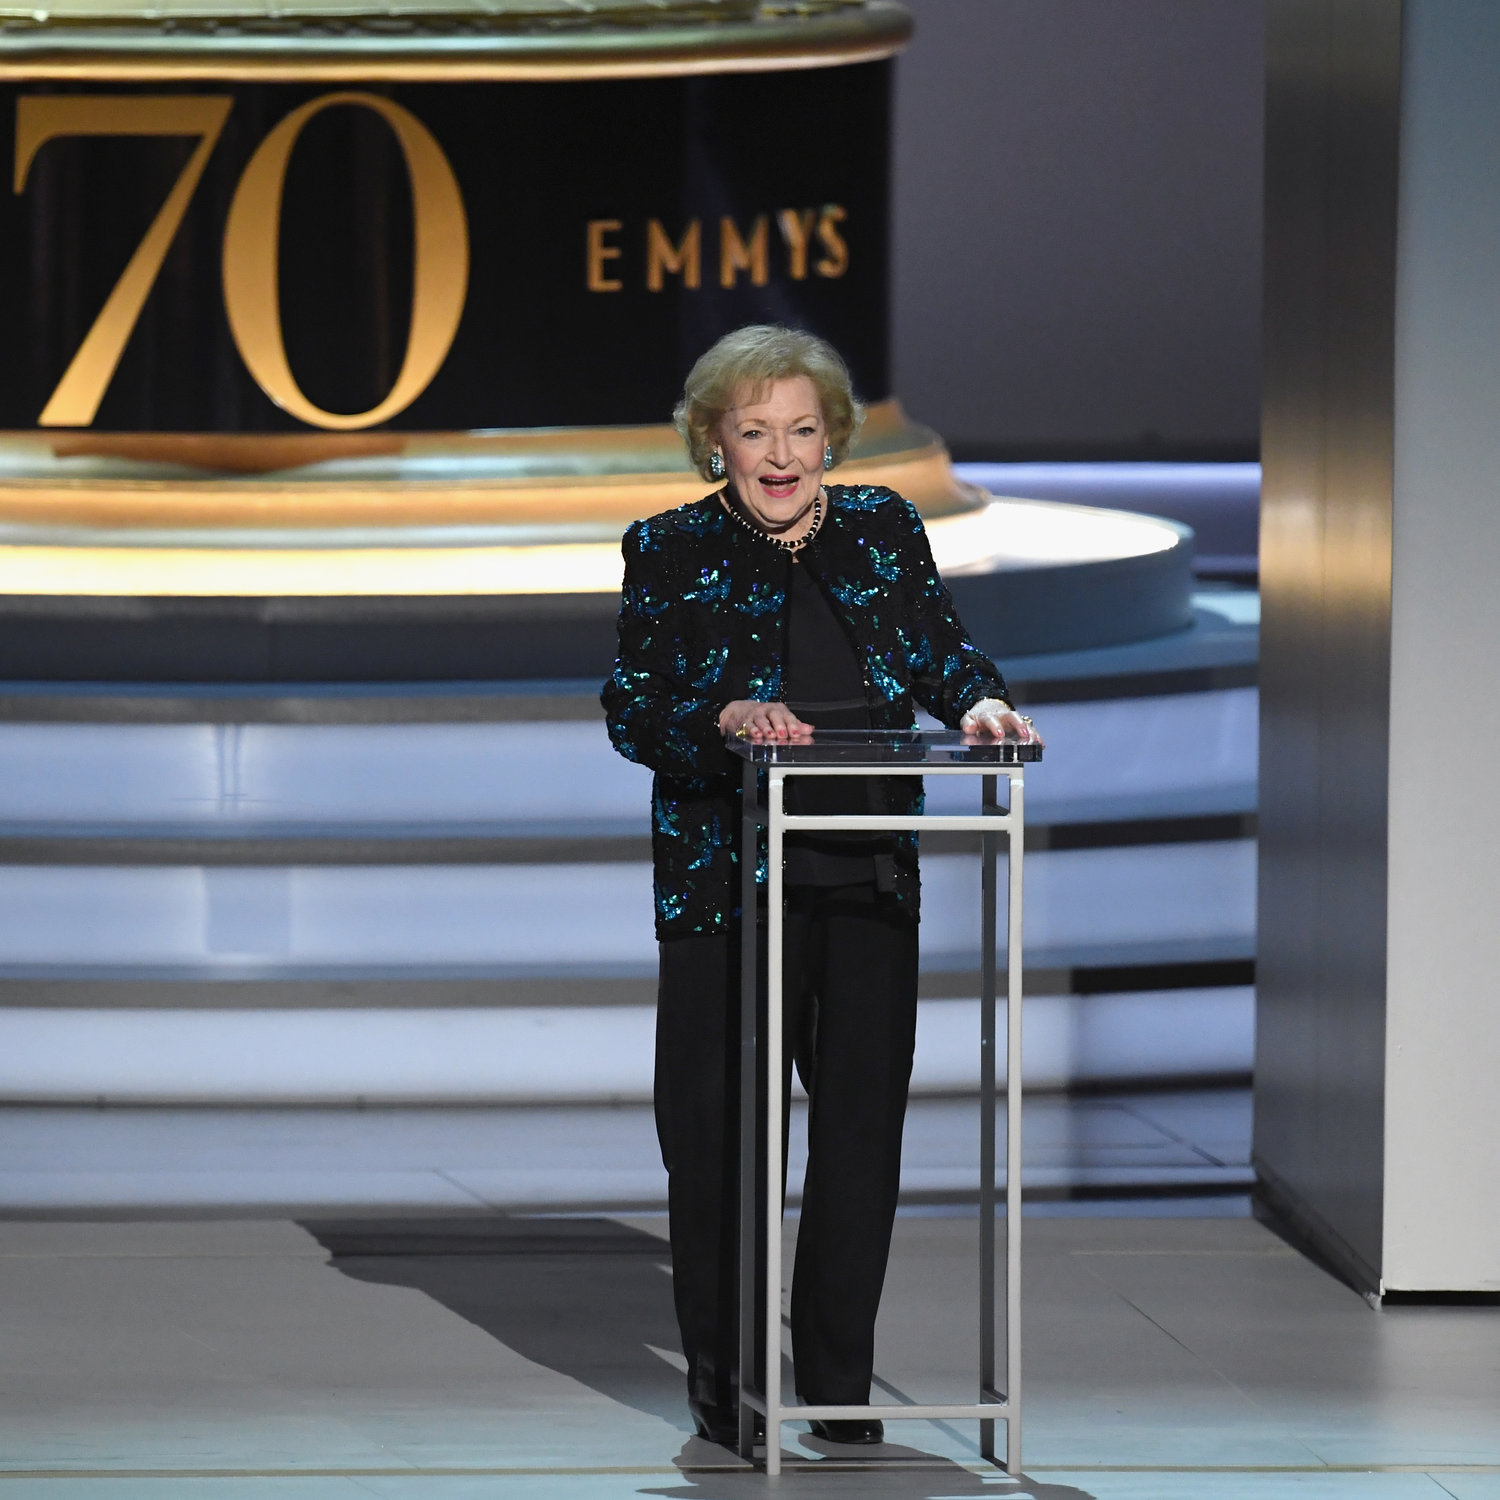 Betty White speaks onstage during the 70th Emmy Awards at Microsoft Theater on Sept. 17, 2018, in Los Angeles.  (Kevin Winter/Getty Images/TNS)